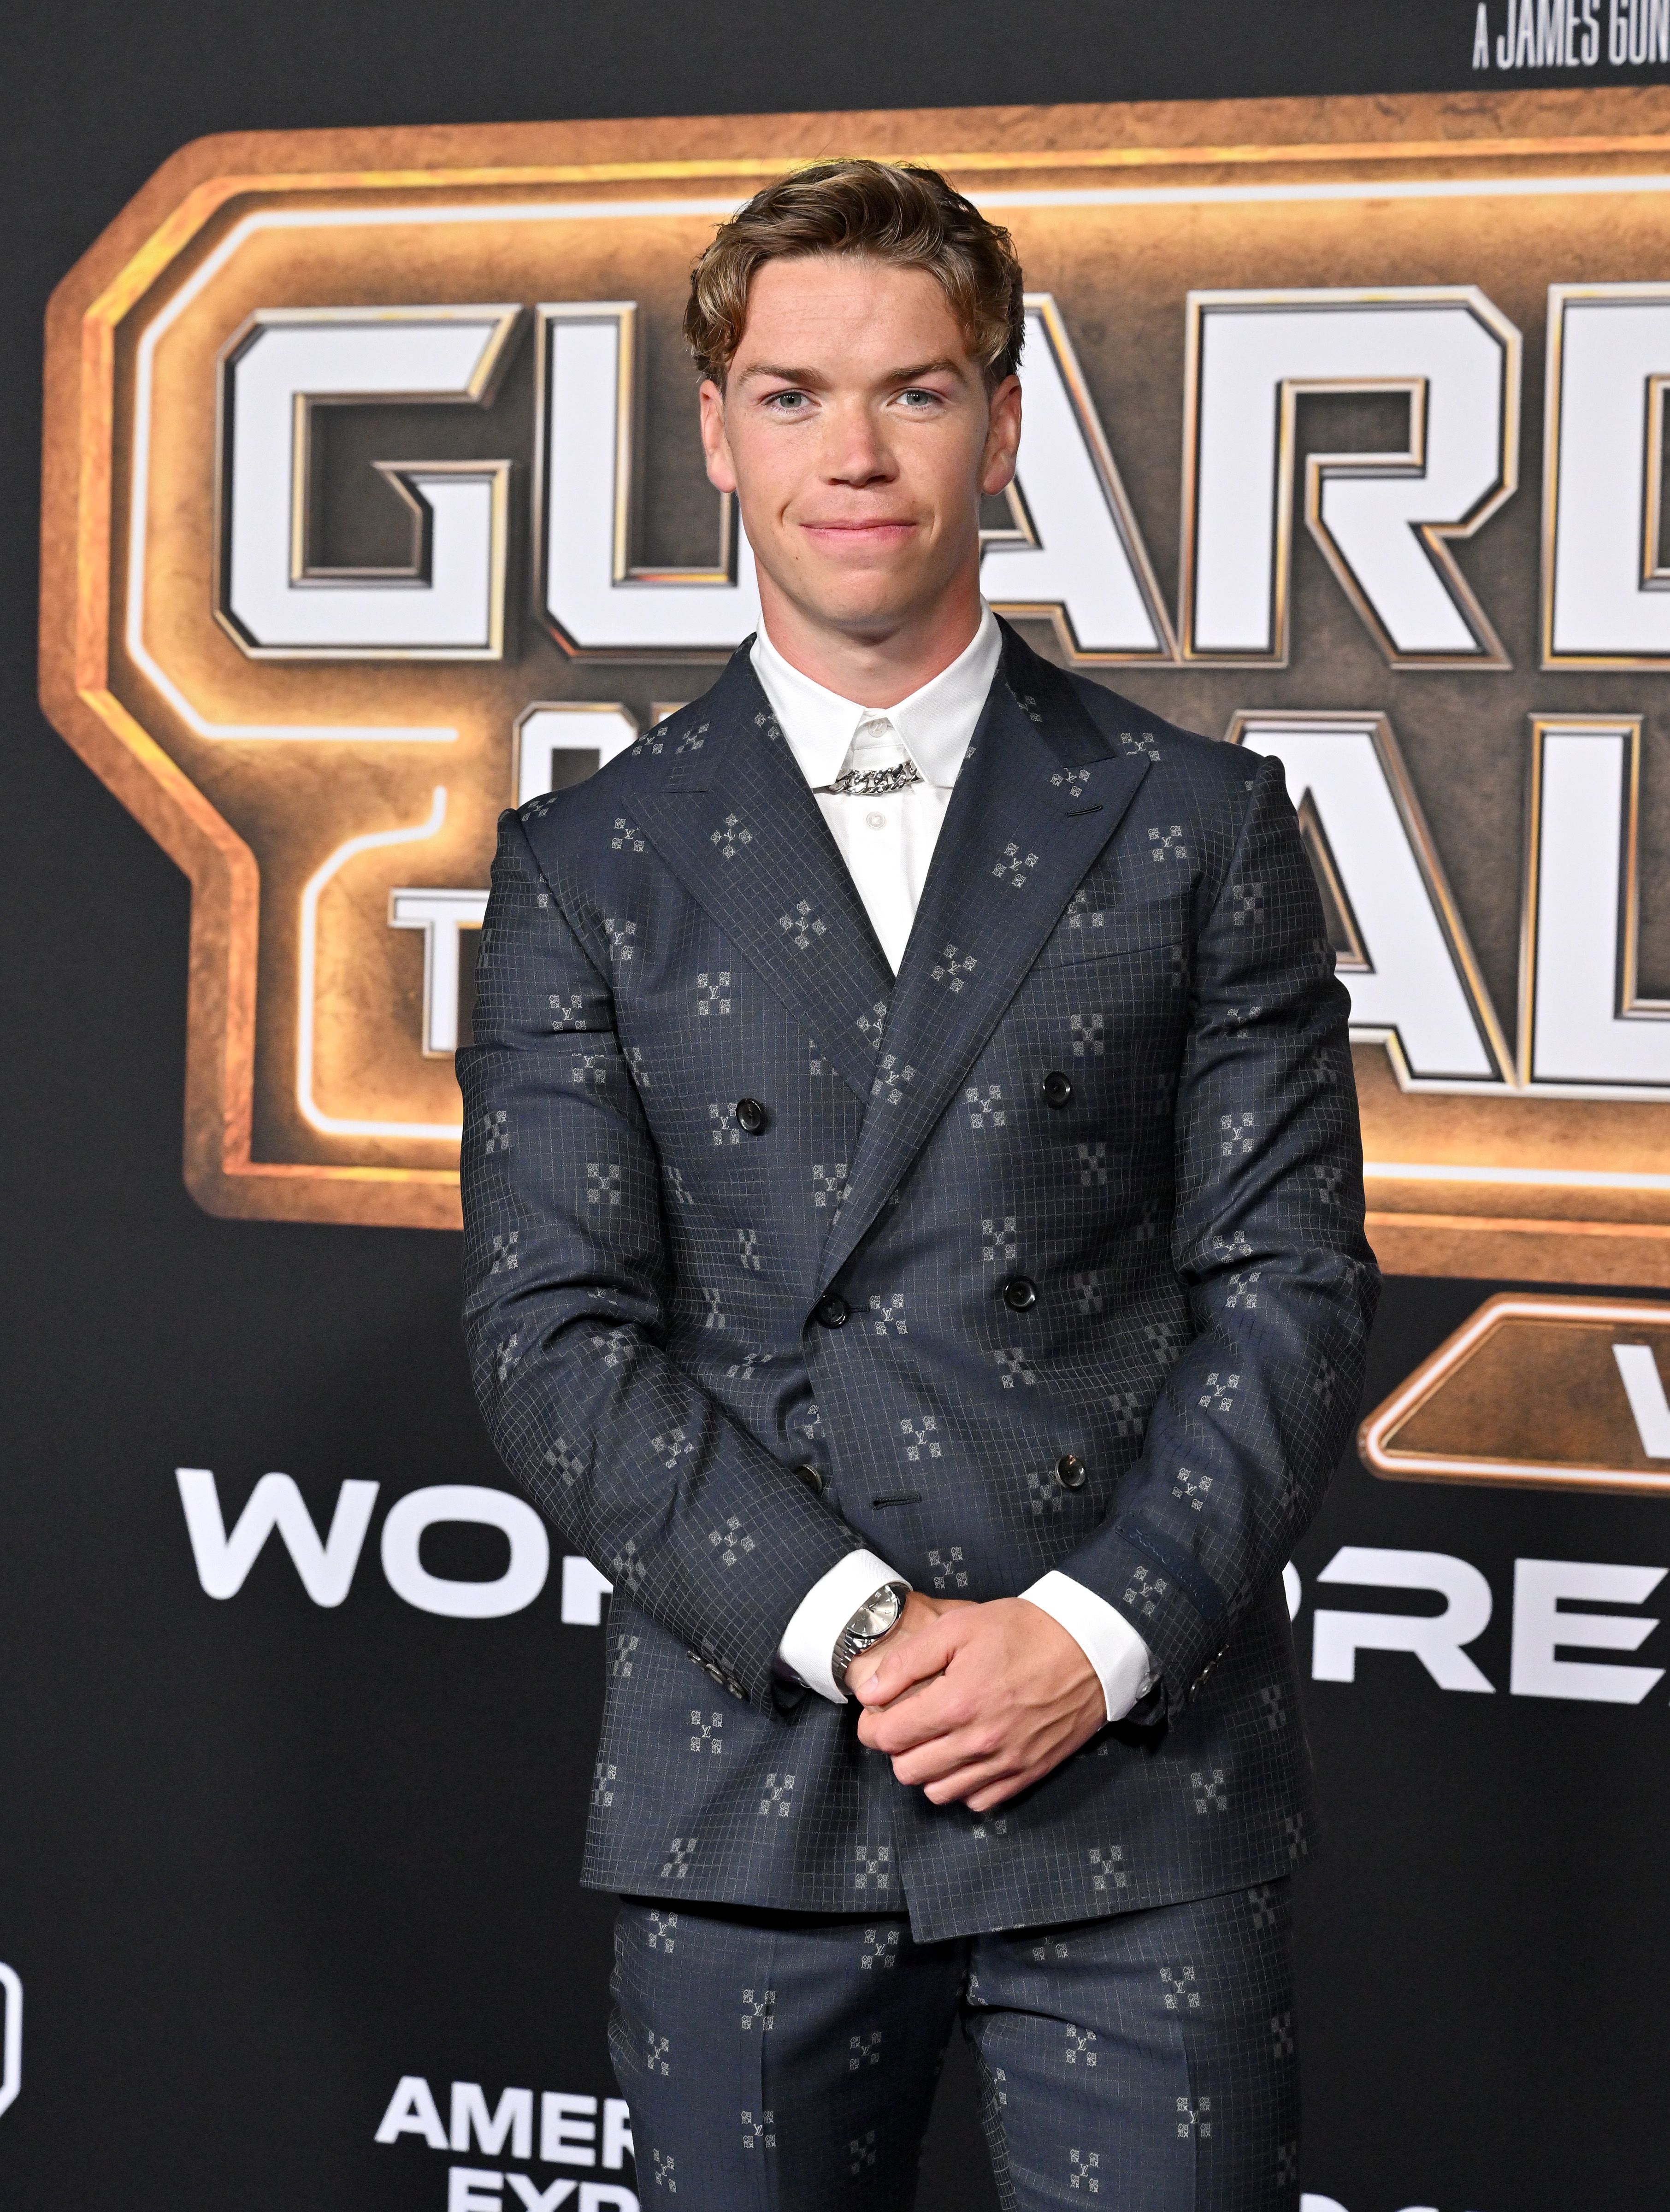 Where You've Seen Guardians of the Galaxy 3's Will Poulter Before